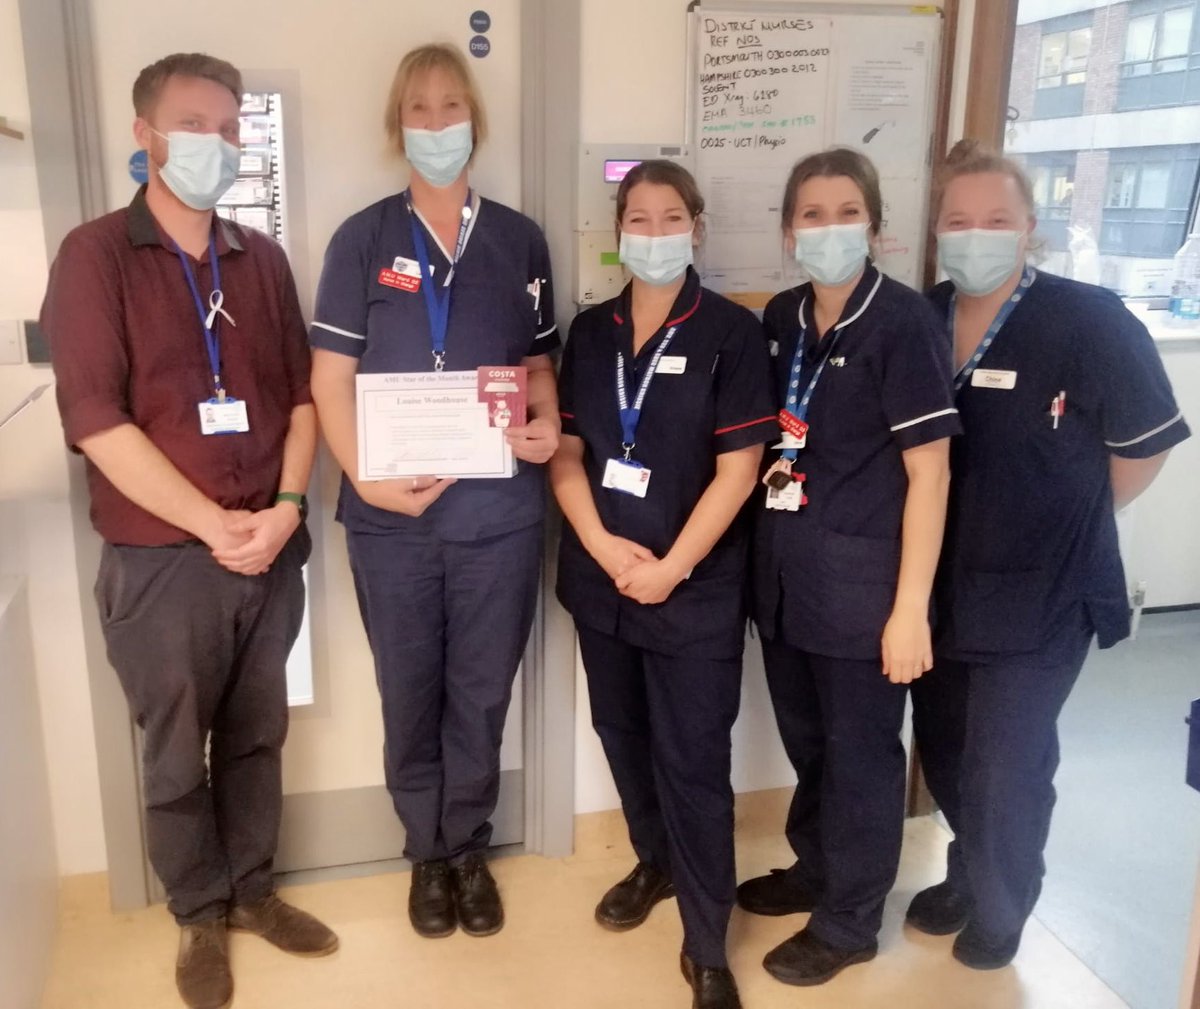 AMU star of the month was awarded to Senior Sister Louise. Nomination was for compassionate care to patients in mental health crisis, support and teaching to students, and supporting her team. Well done Lou! ❤️ @shergold_rachel @AMUSDECPHU @rgnboo @LizRix_PHU